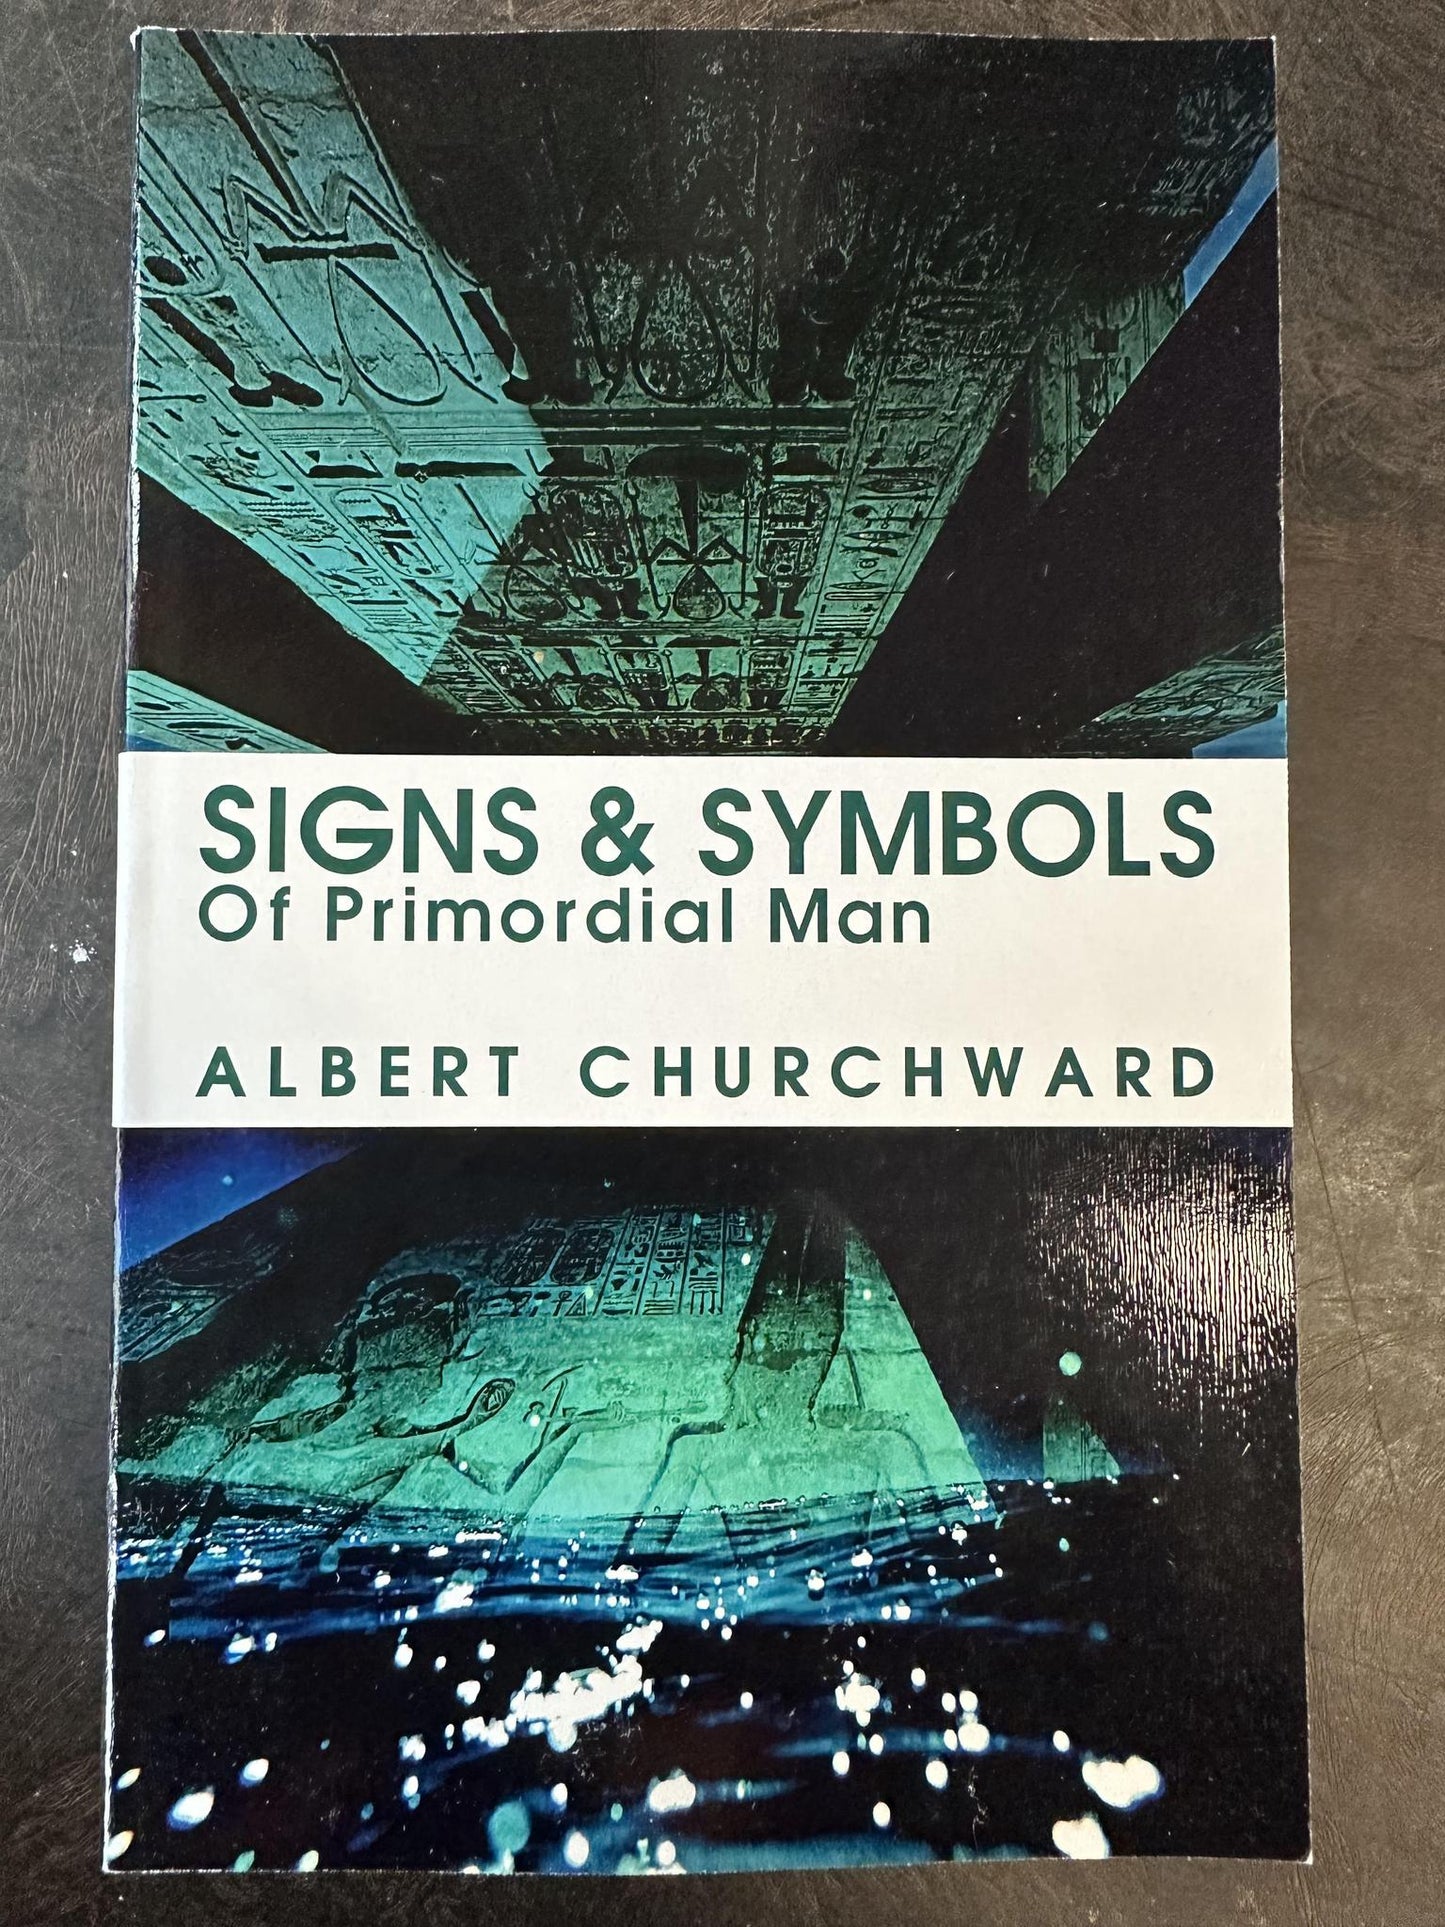 SIGNS AND SYMBOLS OF PRIMORDIAL MAN BY ALBERT CHURCHWARD